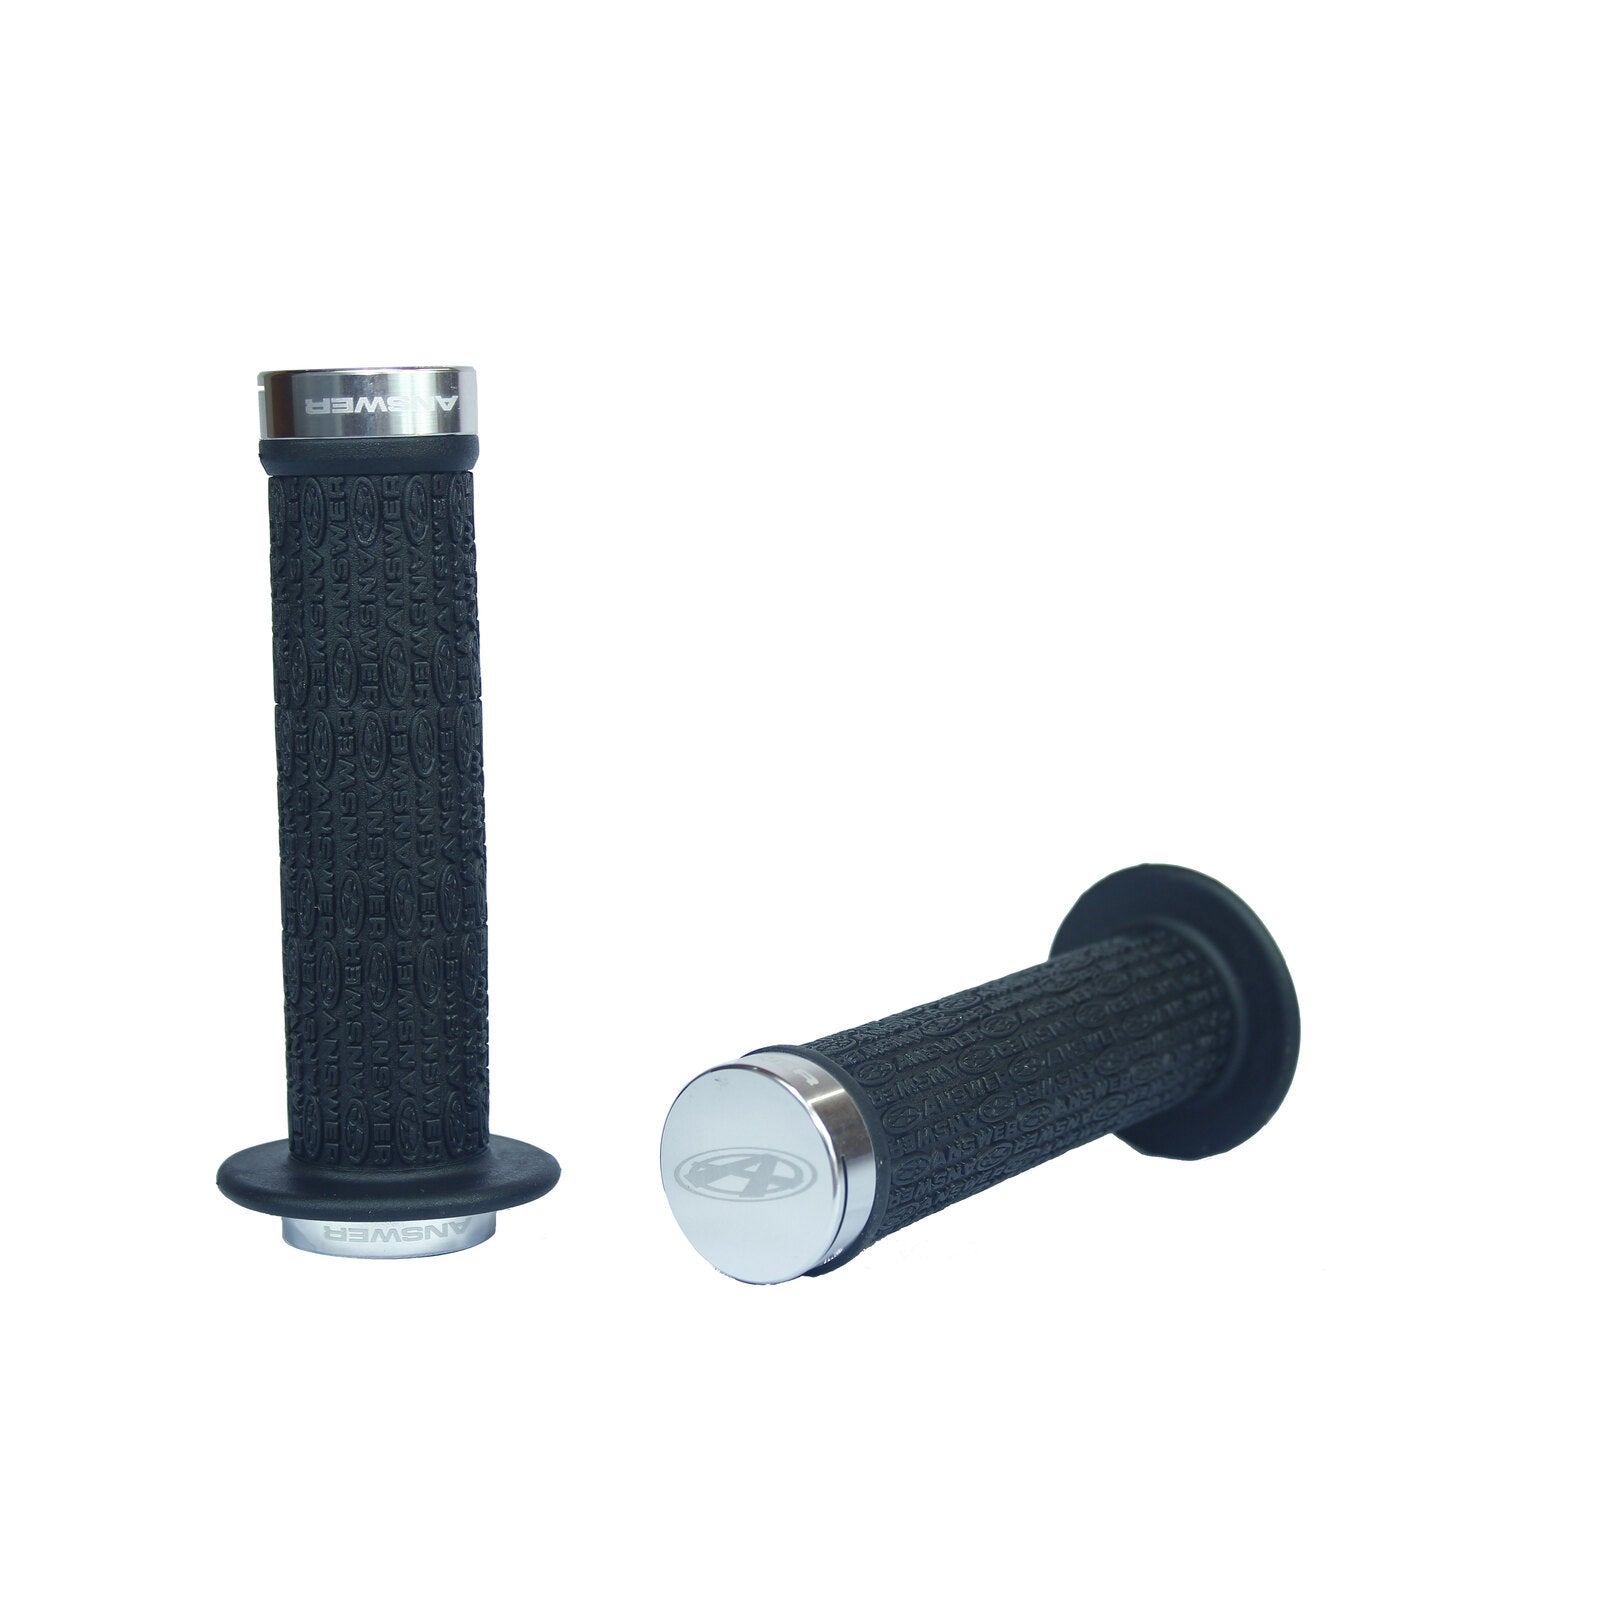 A pair of flangeless black rubber grips, the Answer Mini Lock-On Flanged Grips, on a white background.